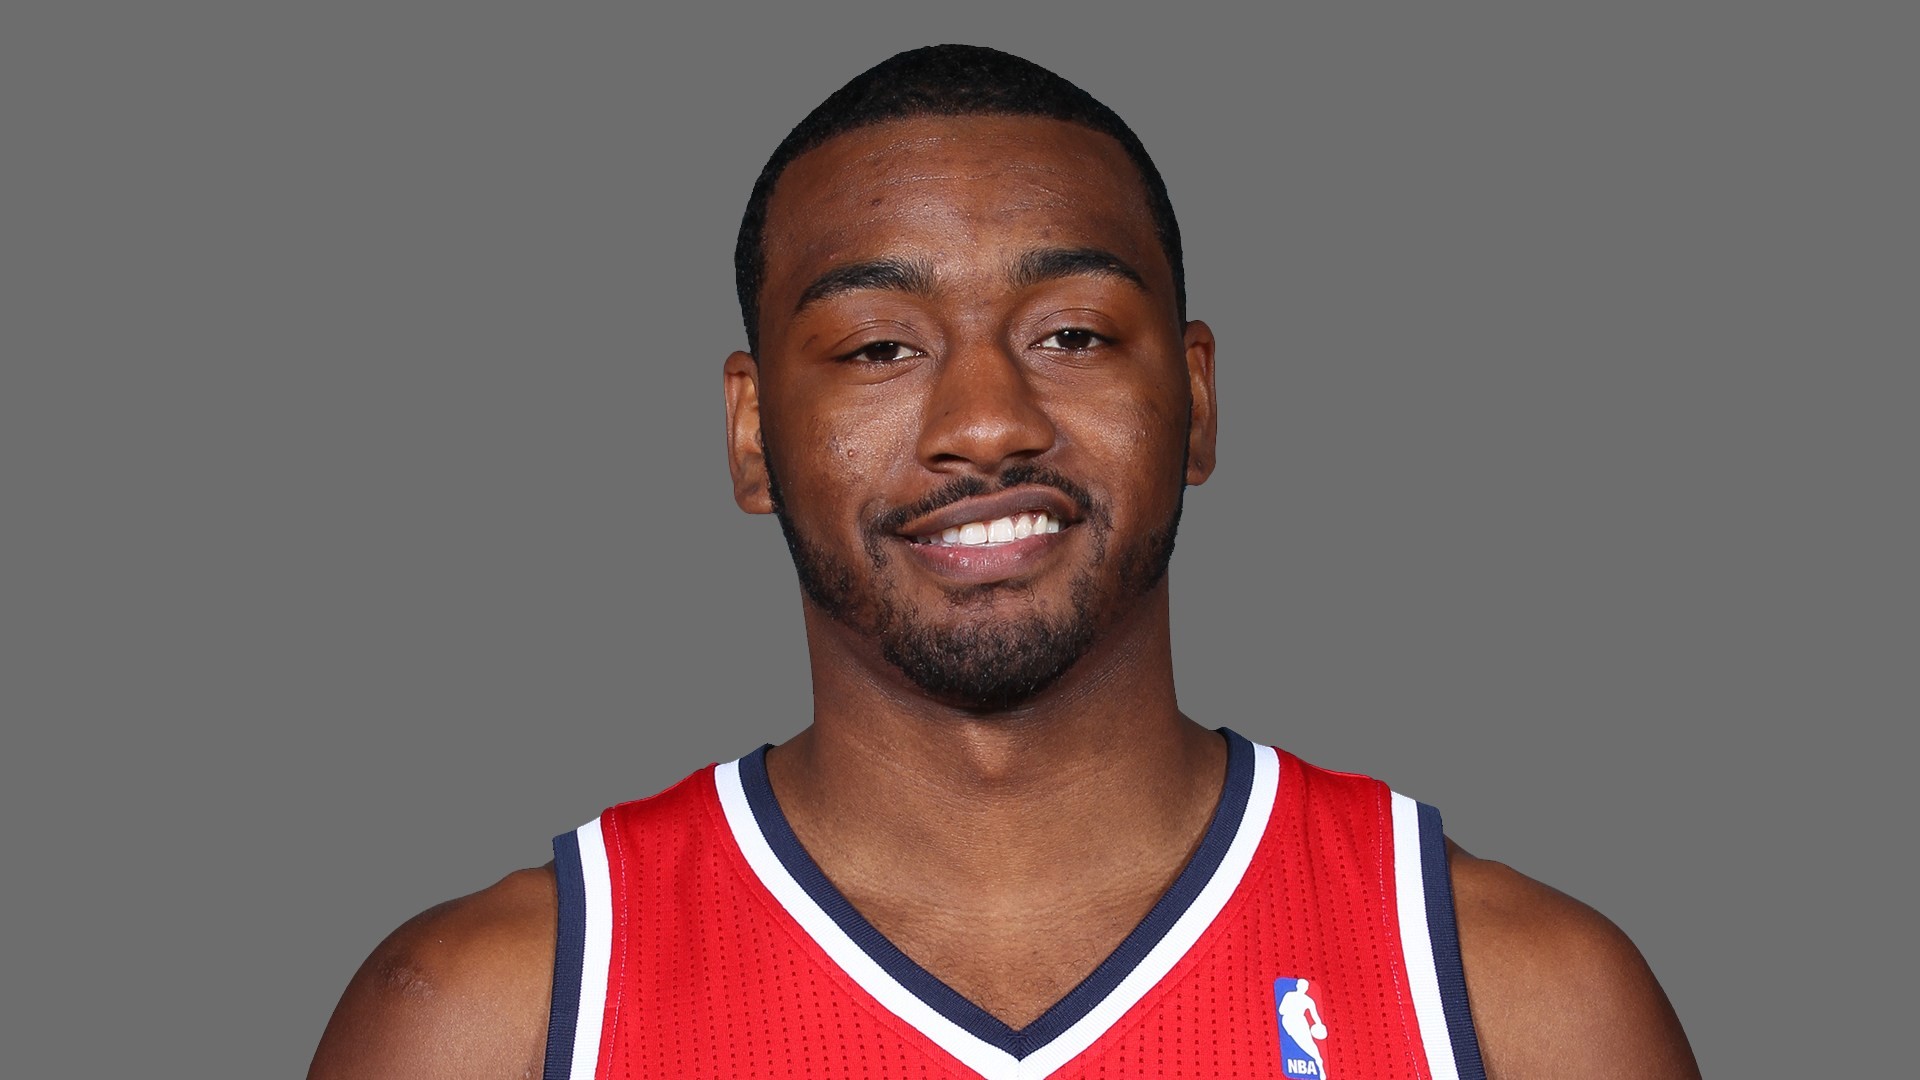 John Wall looks like a point guard who is ready to make his mark any time now and maybe that time is now